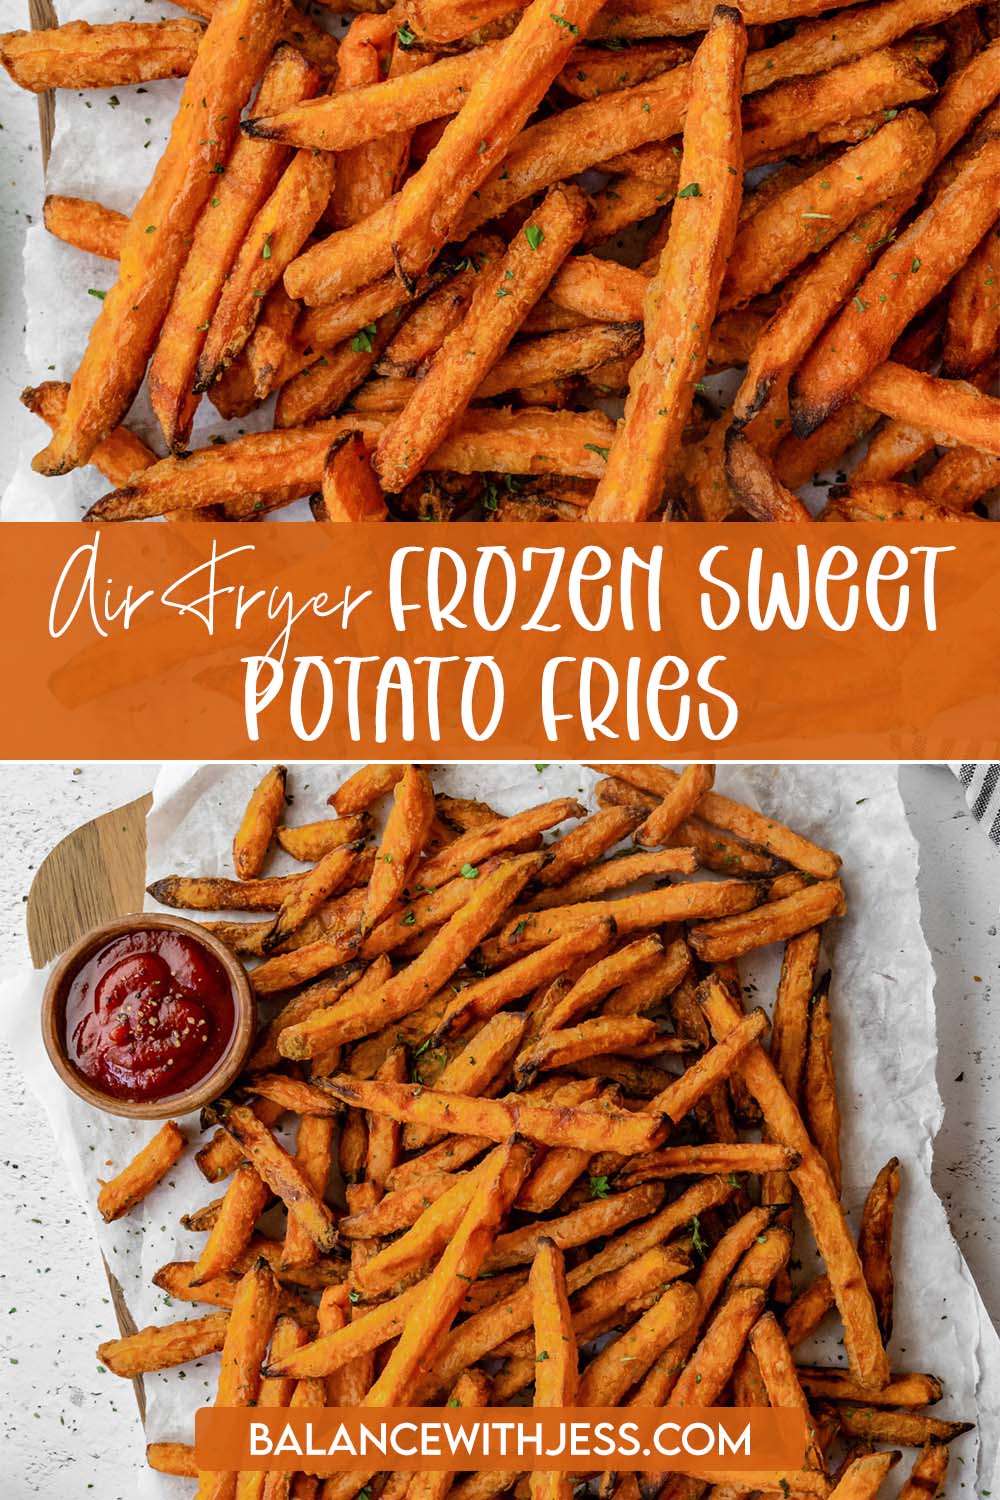 For the crispiest sweet potato fries, use the air fryer! It uses a lot less oil than deep frying and cooks faster than the oven. These are great for a healthy, quick, and easy snack!